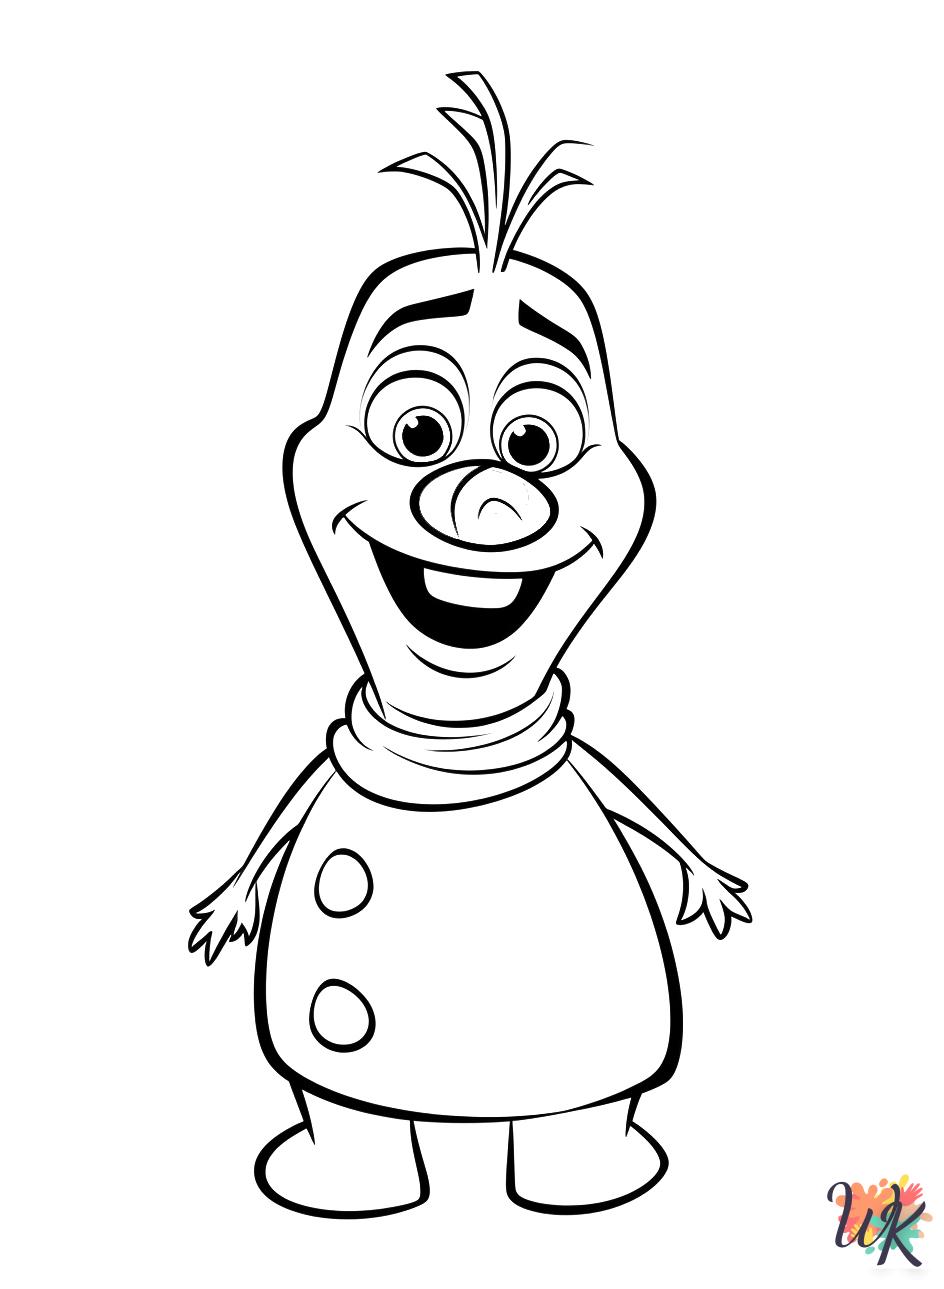 Olaf Coloring Pages 28